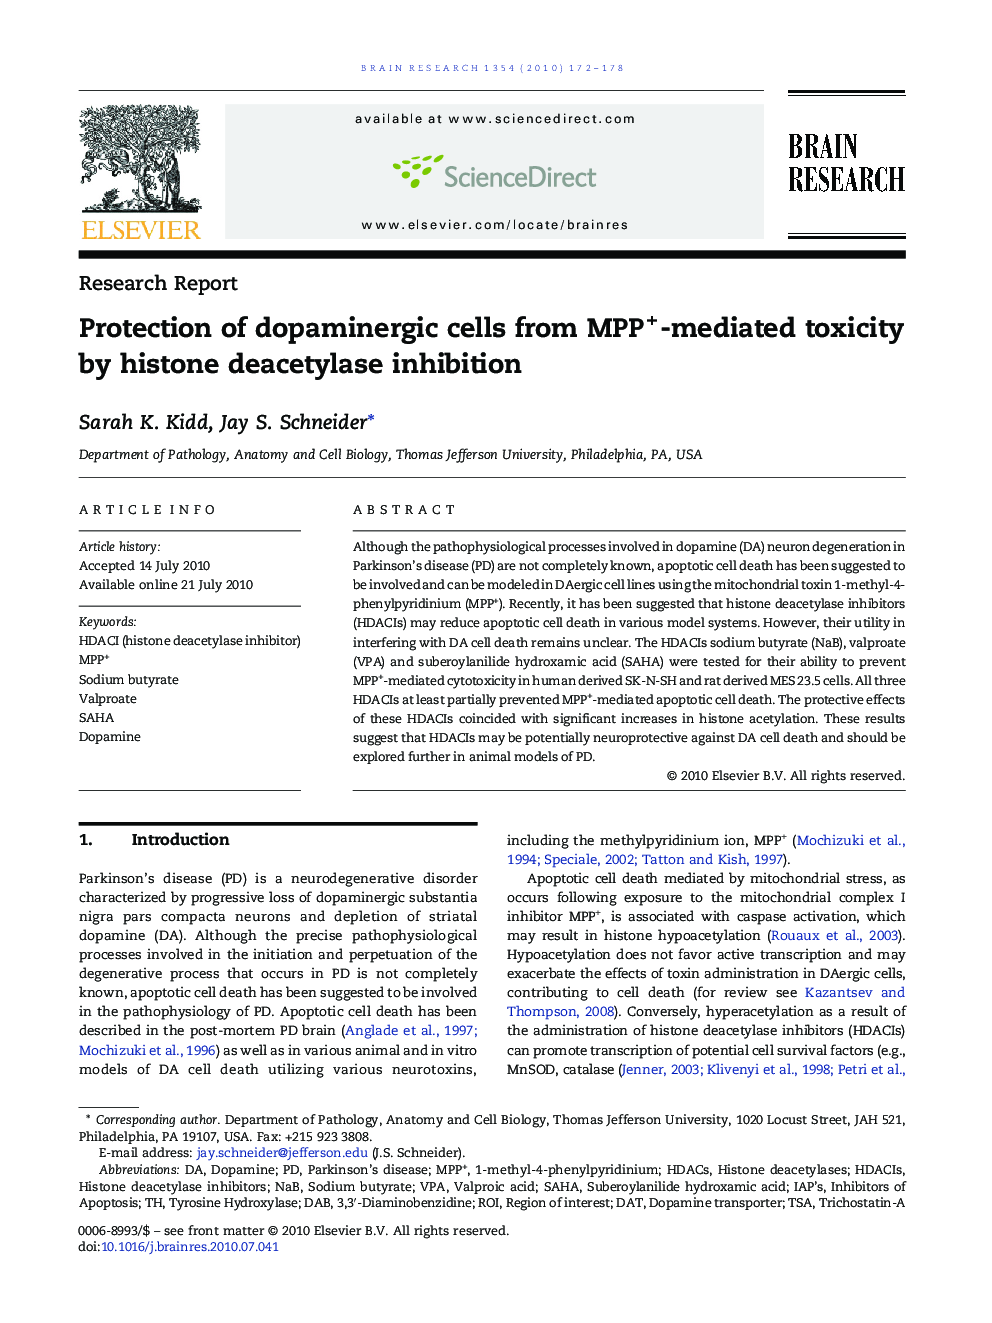 Protection of dopaminergic cells from MPP+-mediated toxicity by histone deacetylase inhibition